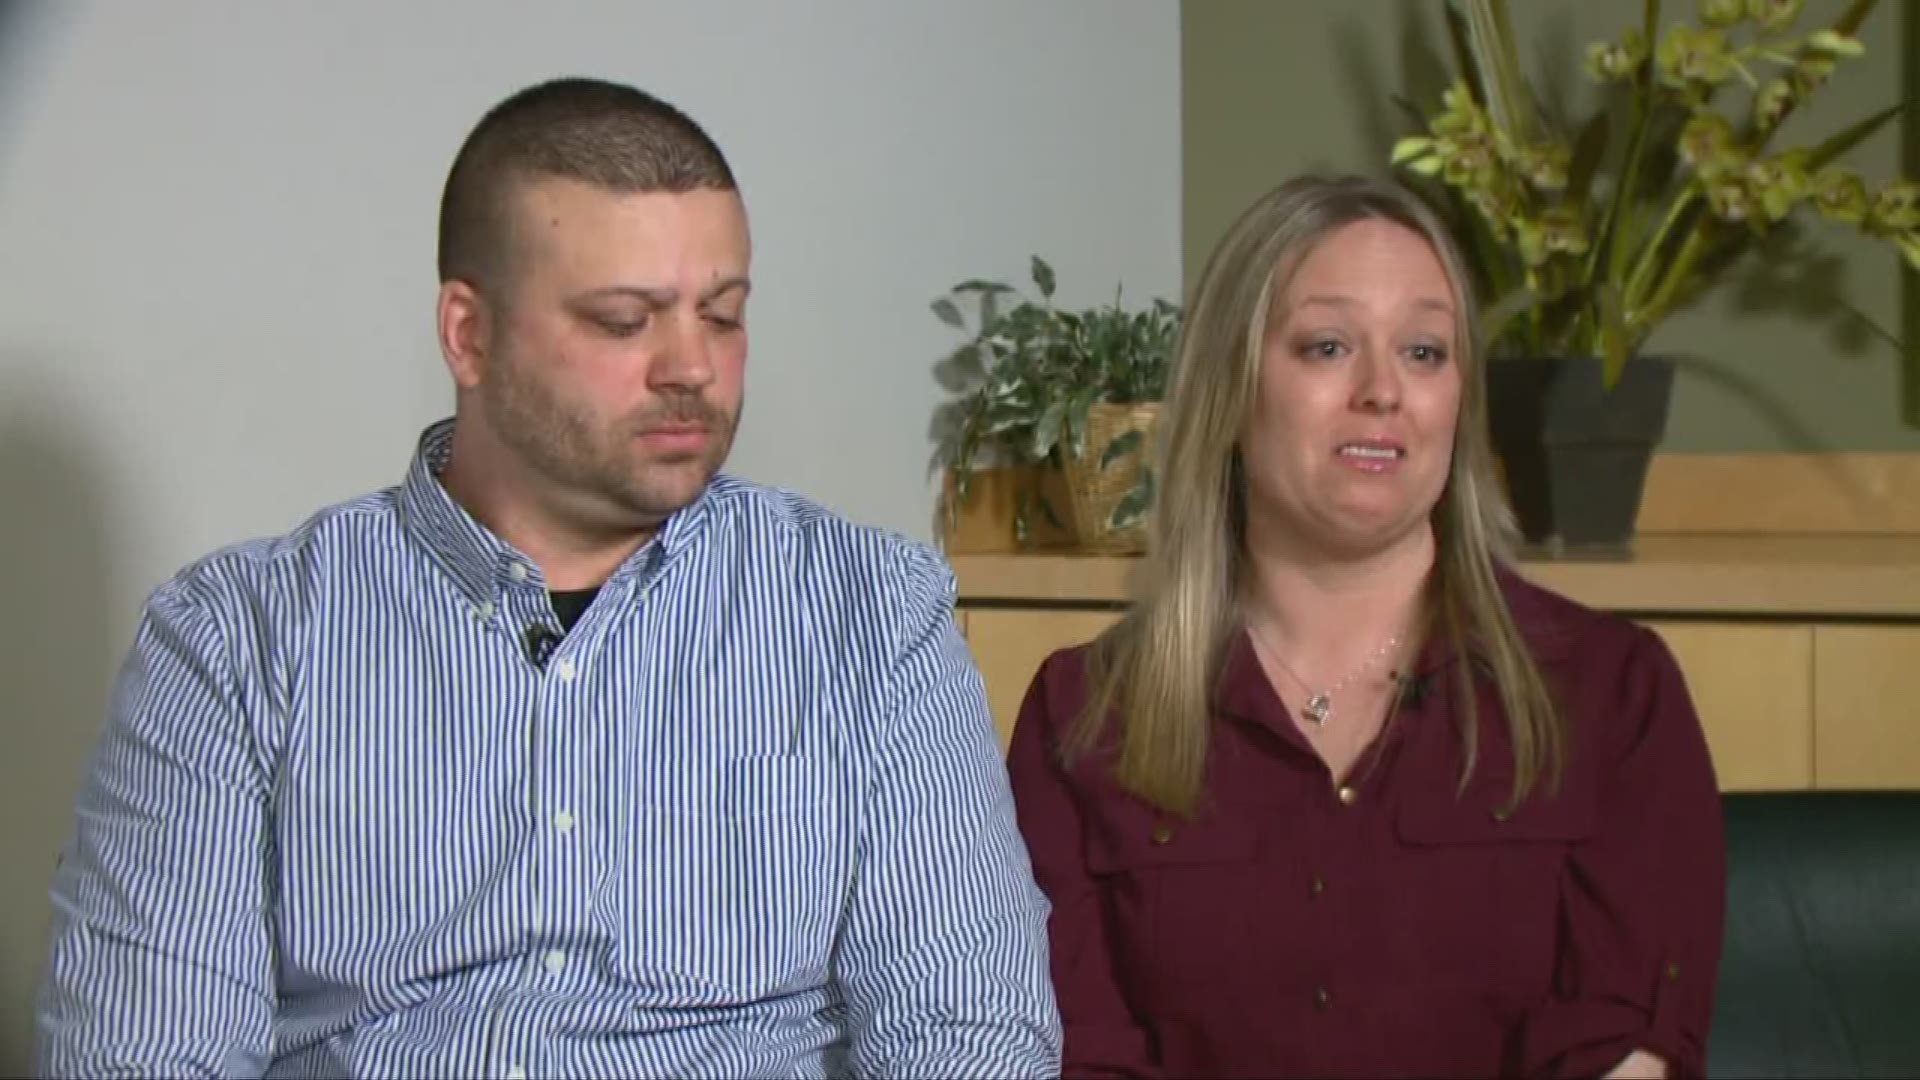 Local couple wants change in fertility regulations after UH failure